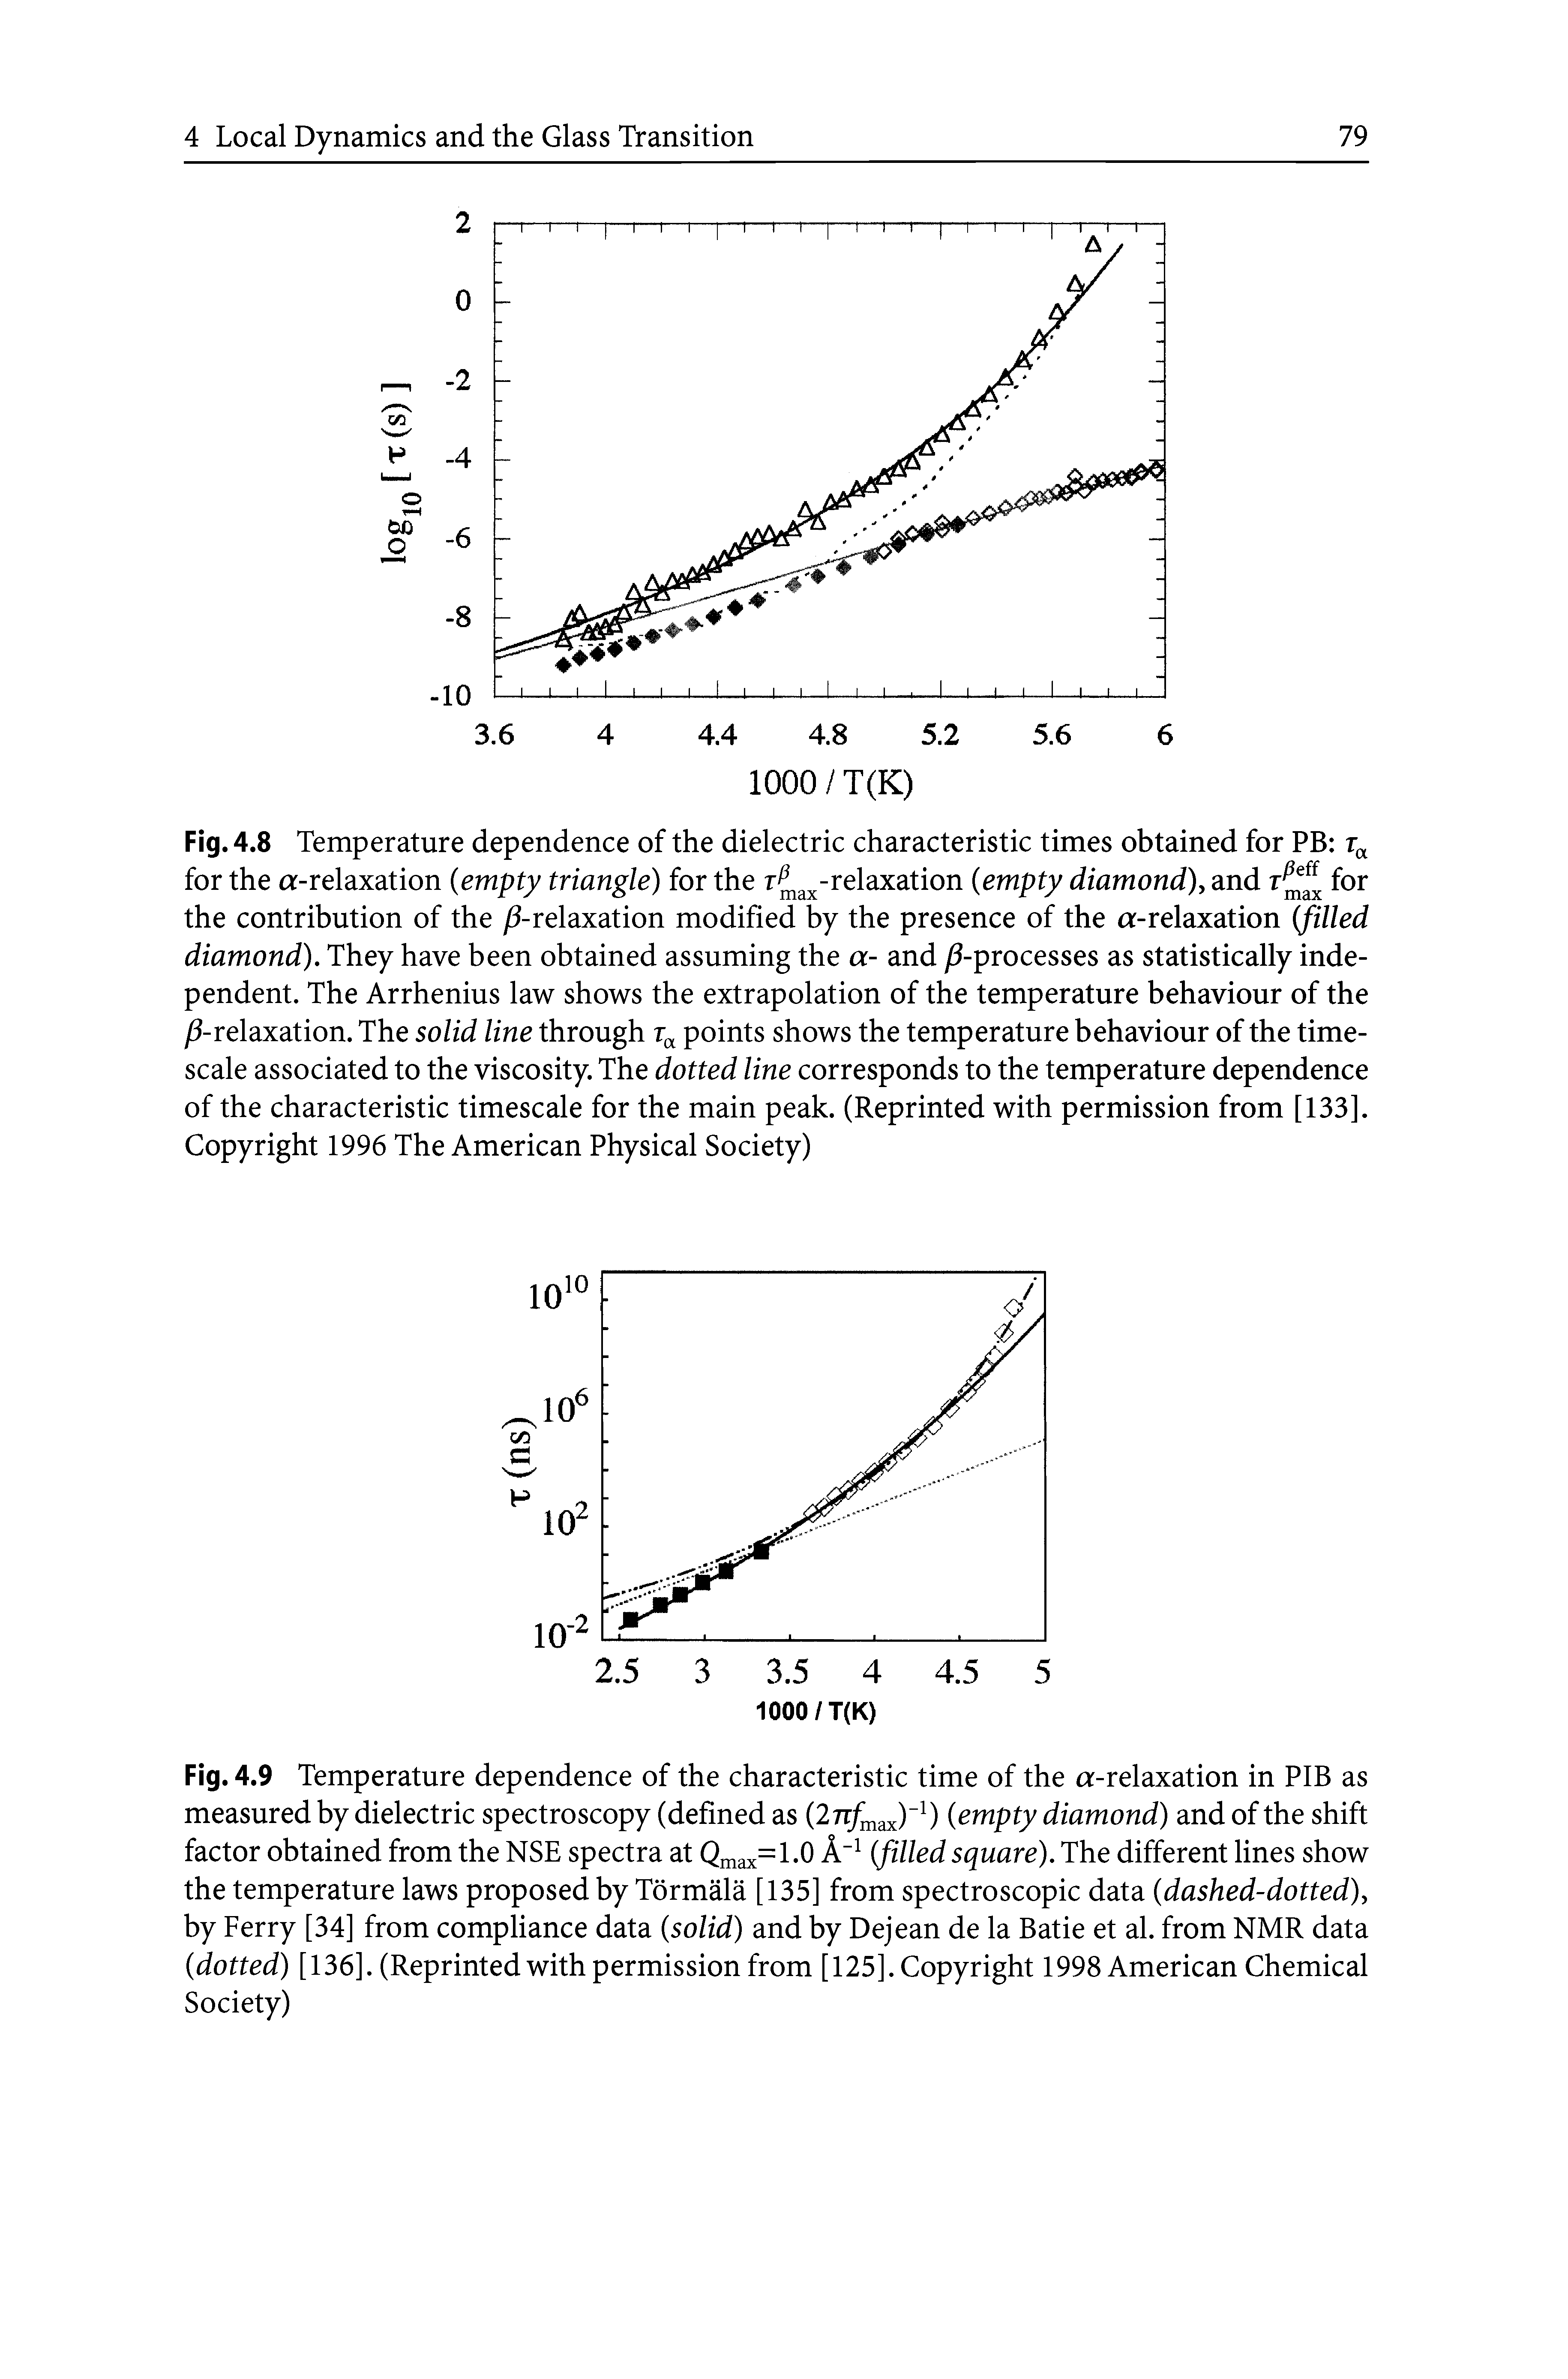 Fig. 4.8 Temperature dependence of the dielectric characteristic times obtained for PB for the a-relaxation (empty triangle) for the r -relaxation (empty diamond), and for the contribution of the -relaxation modified by the presence of the a-relaxation (filled diamond). They have been obtained assuming the a- and -processes as statistically independent. The Arrhenius law shows the extrapolation of the temperature behaviour of the -relaxation. The solid line through points shows the temperature behaviour of the time-scale associated to the viscosity. The dotted line corresponds to the temperature dependence of the characteristic timescale for the main peak. (Reprinted with permission from [133]. Copyright 1996 The American Physical Society)...